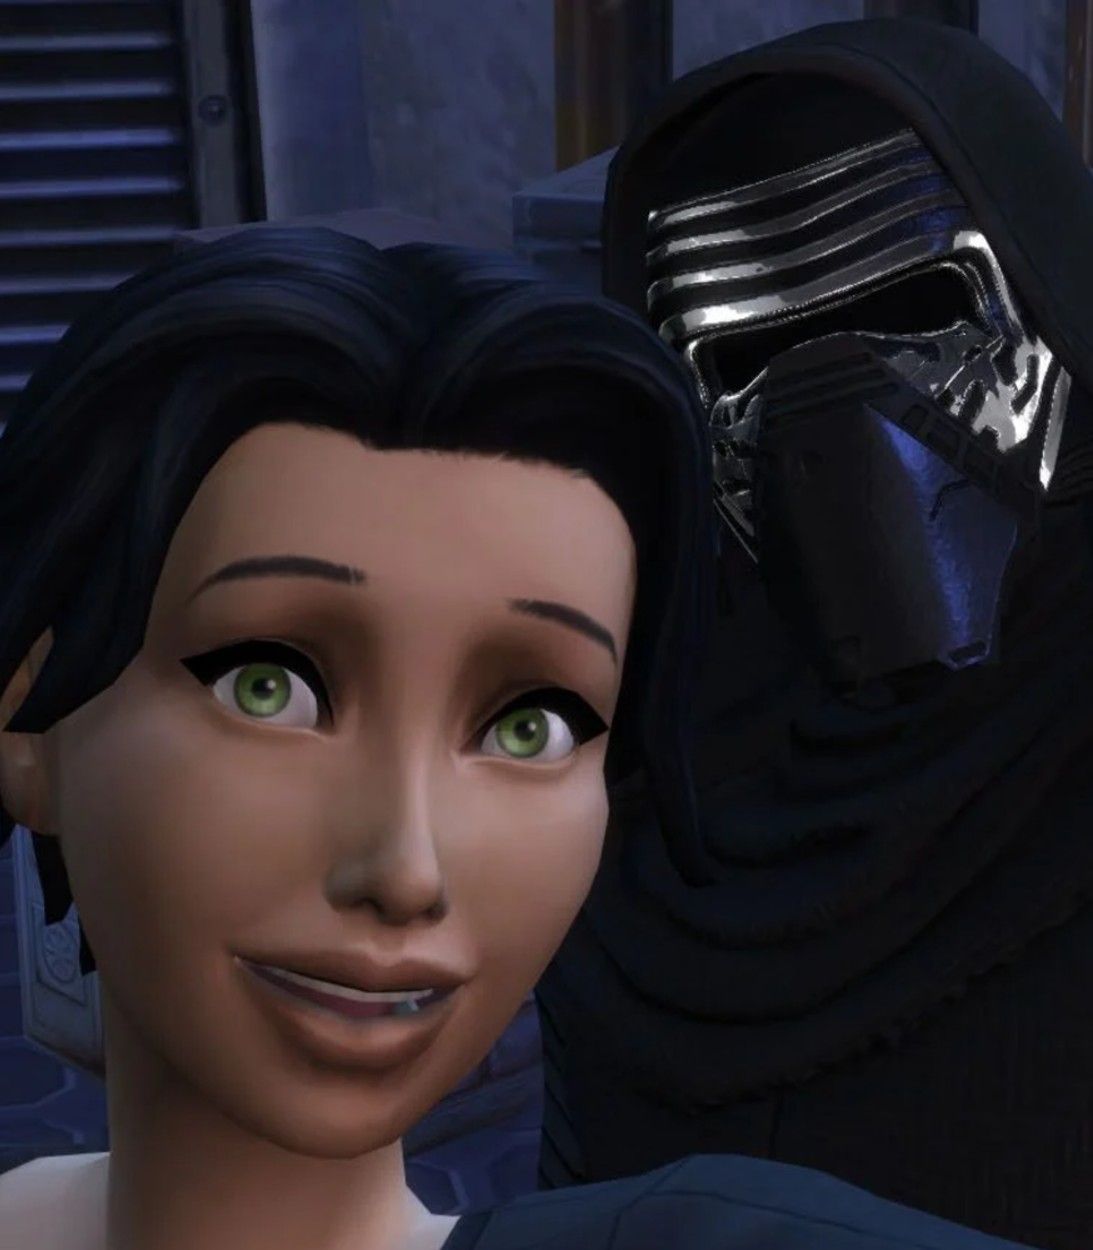 A player's Sim takes a selfie with Kylo Ren in Sims 4 Star Wars: Journey to Batuu